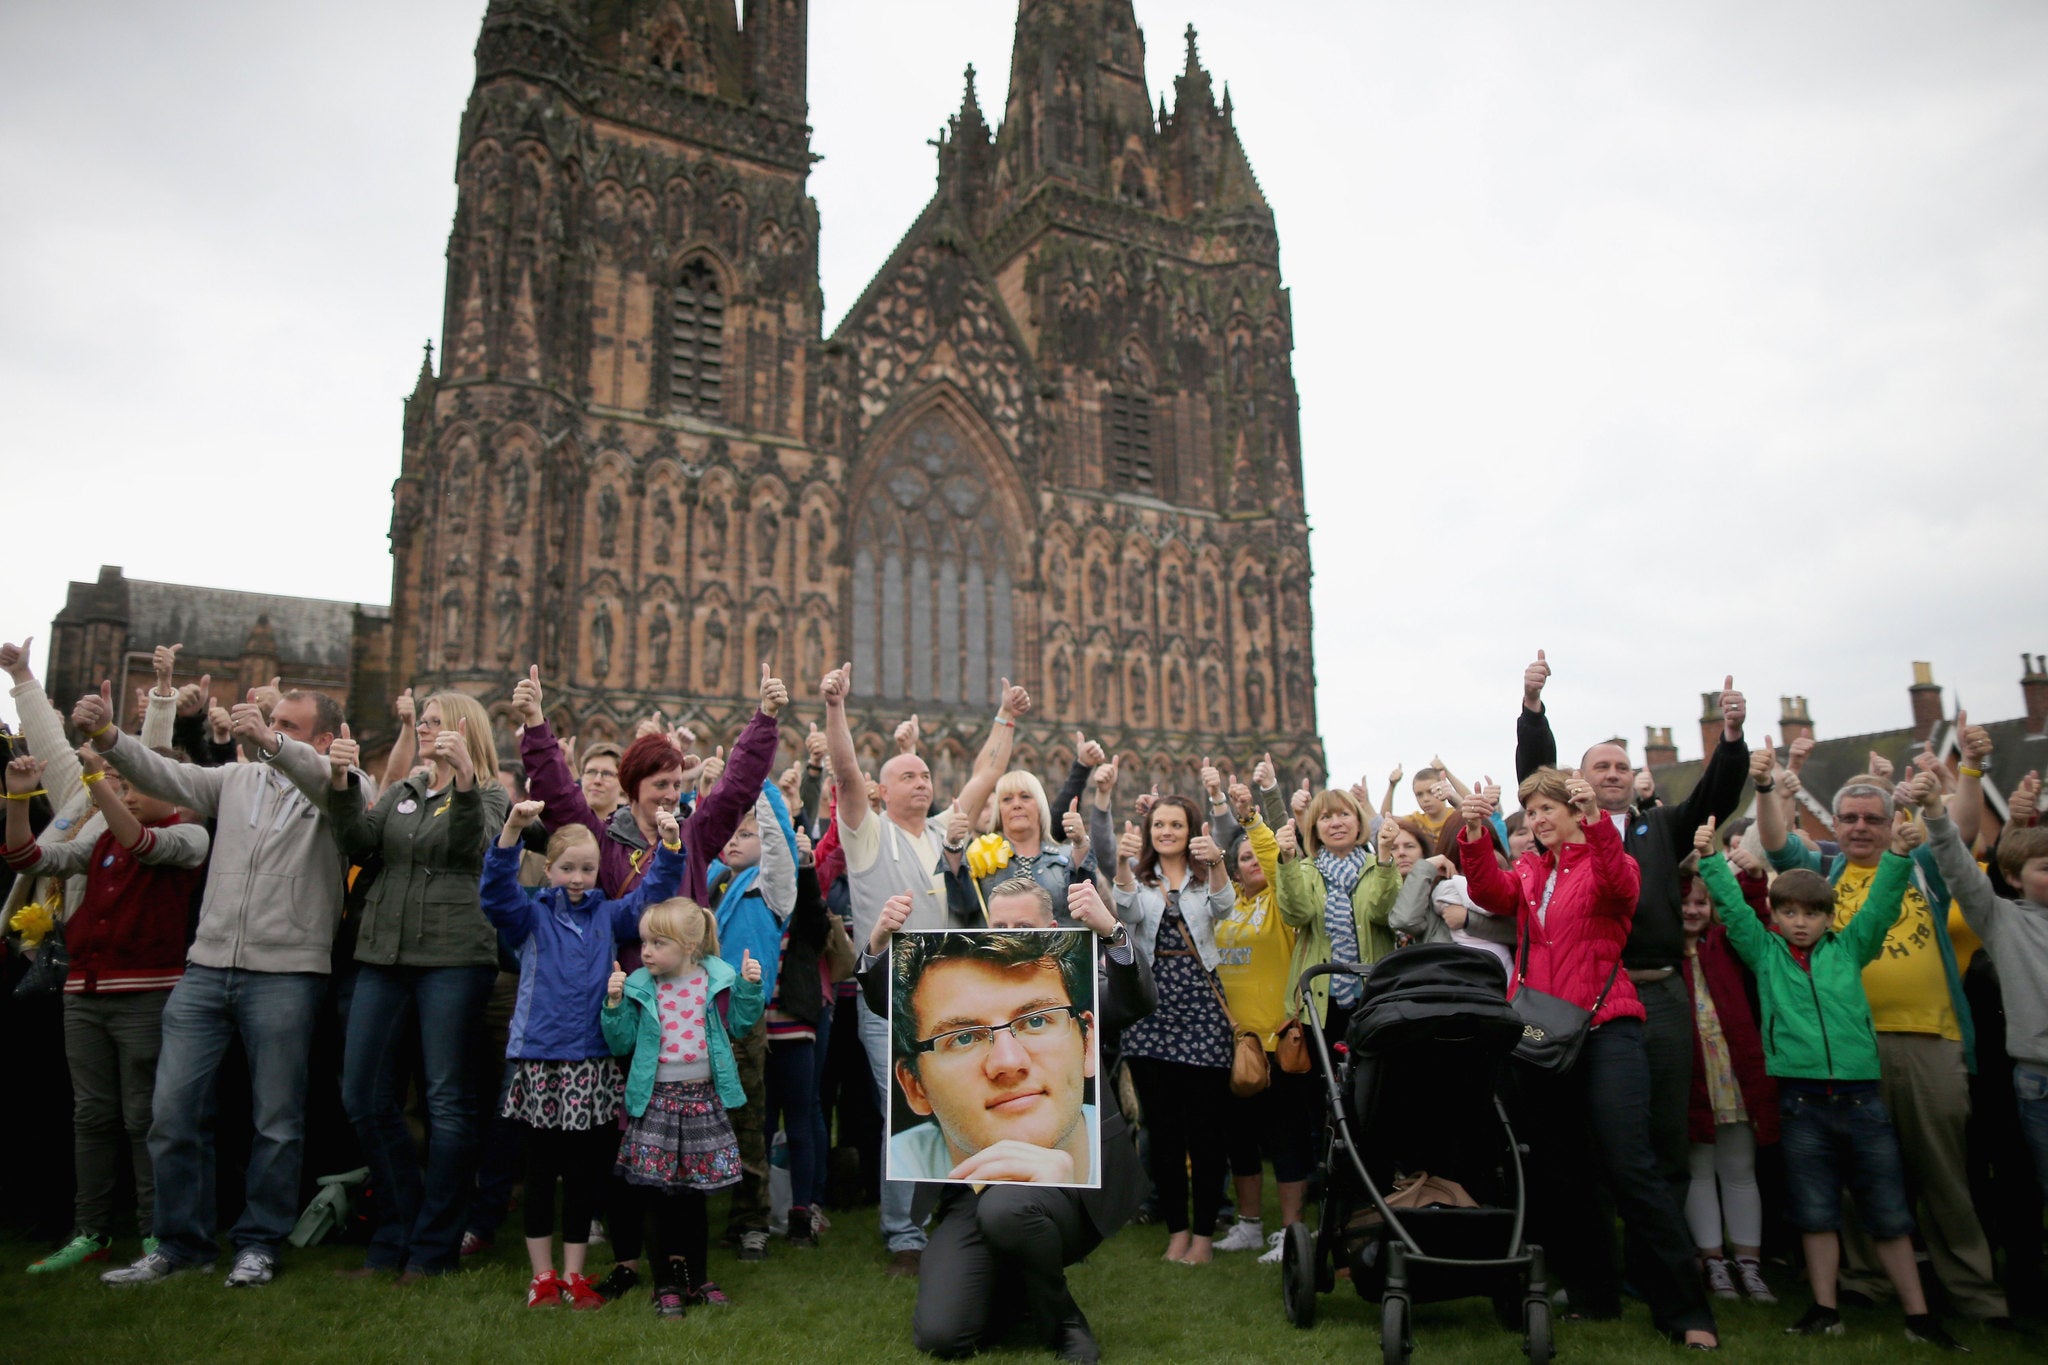 Members of the public take part in a minute of celebration and give the "Thumbs Up" sign for the life of teenage cancer fundraiser Stephen Sutton during a vigil at Lichfield Cathedral